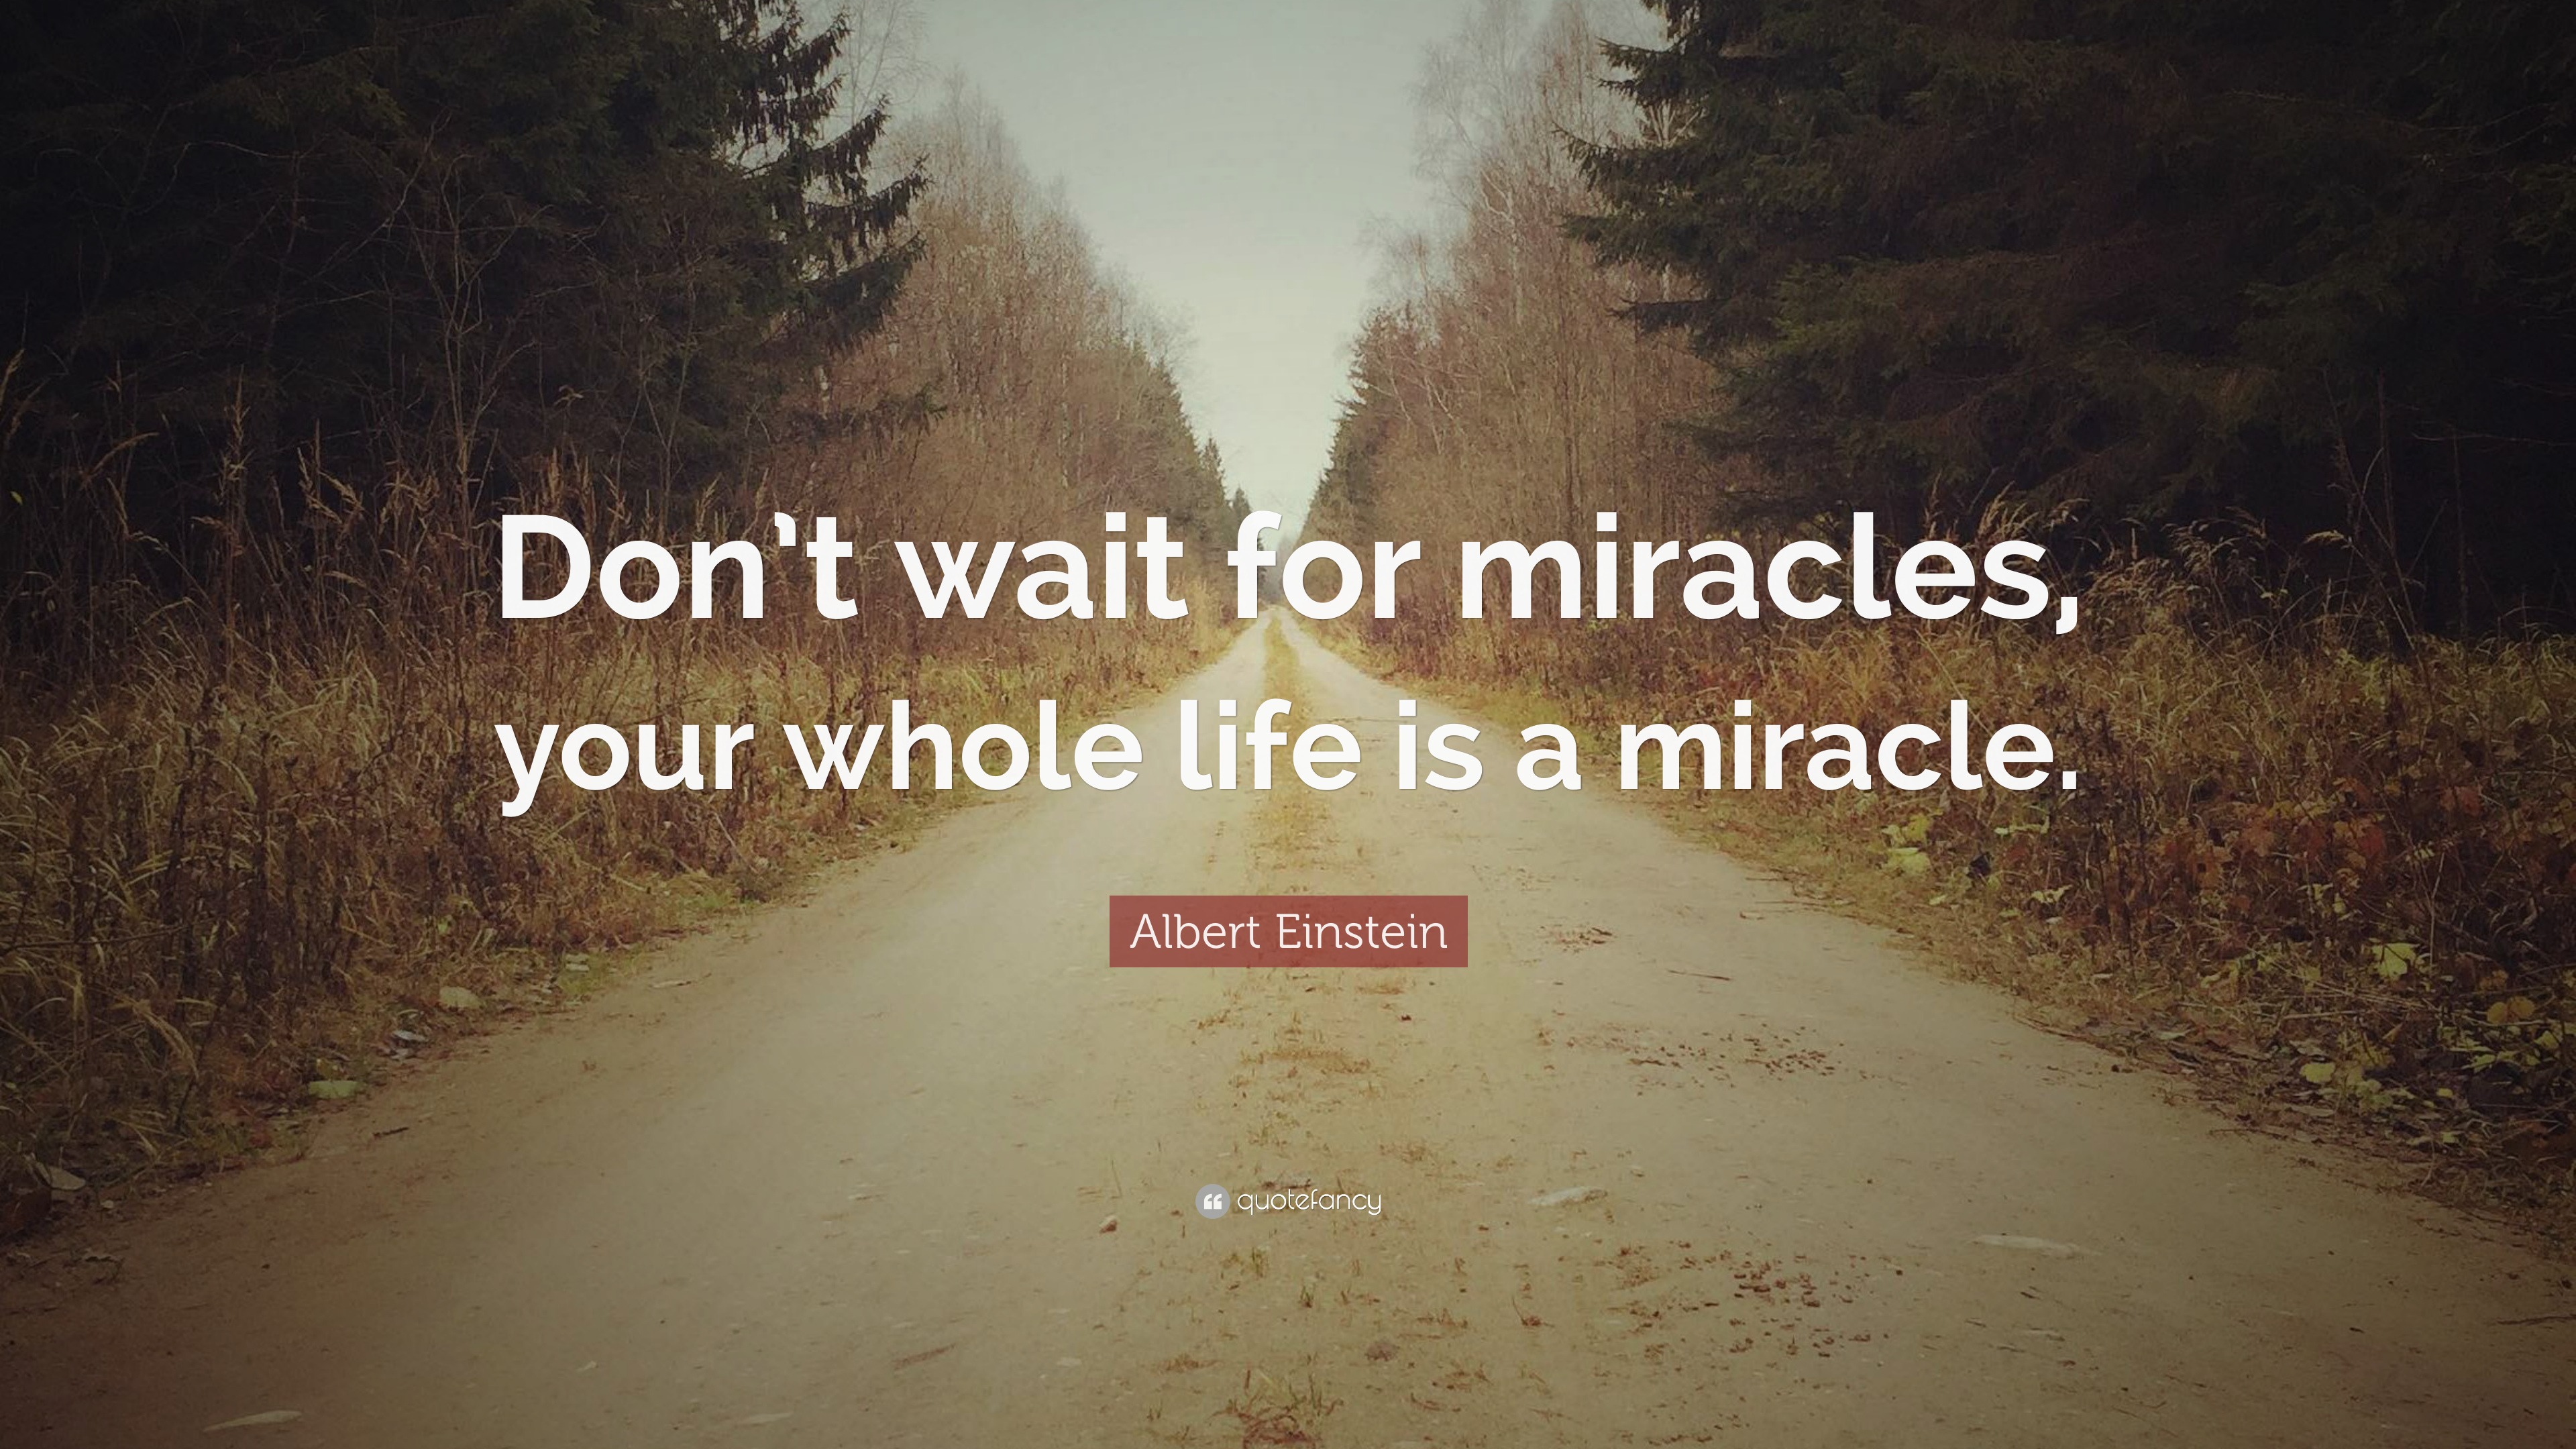 Albert Einstein Quote: “Don’t wait for miracles, your whole life is a